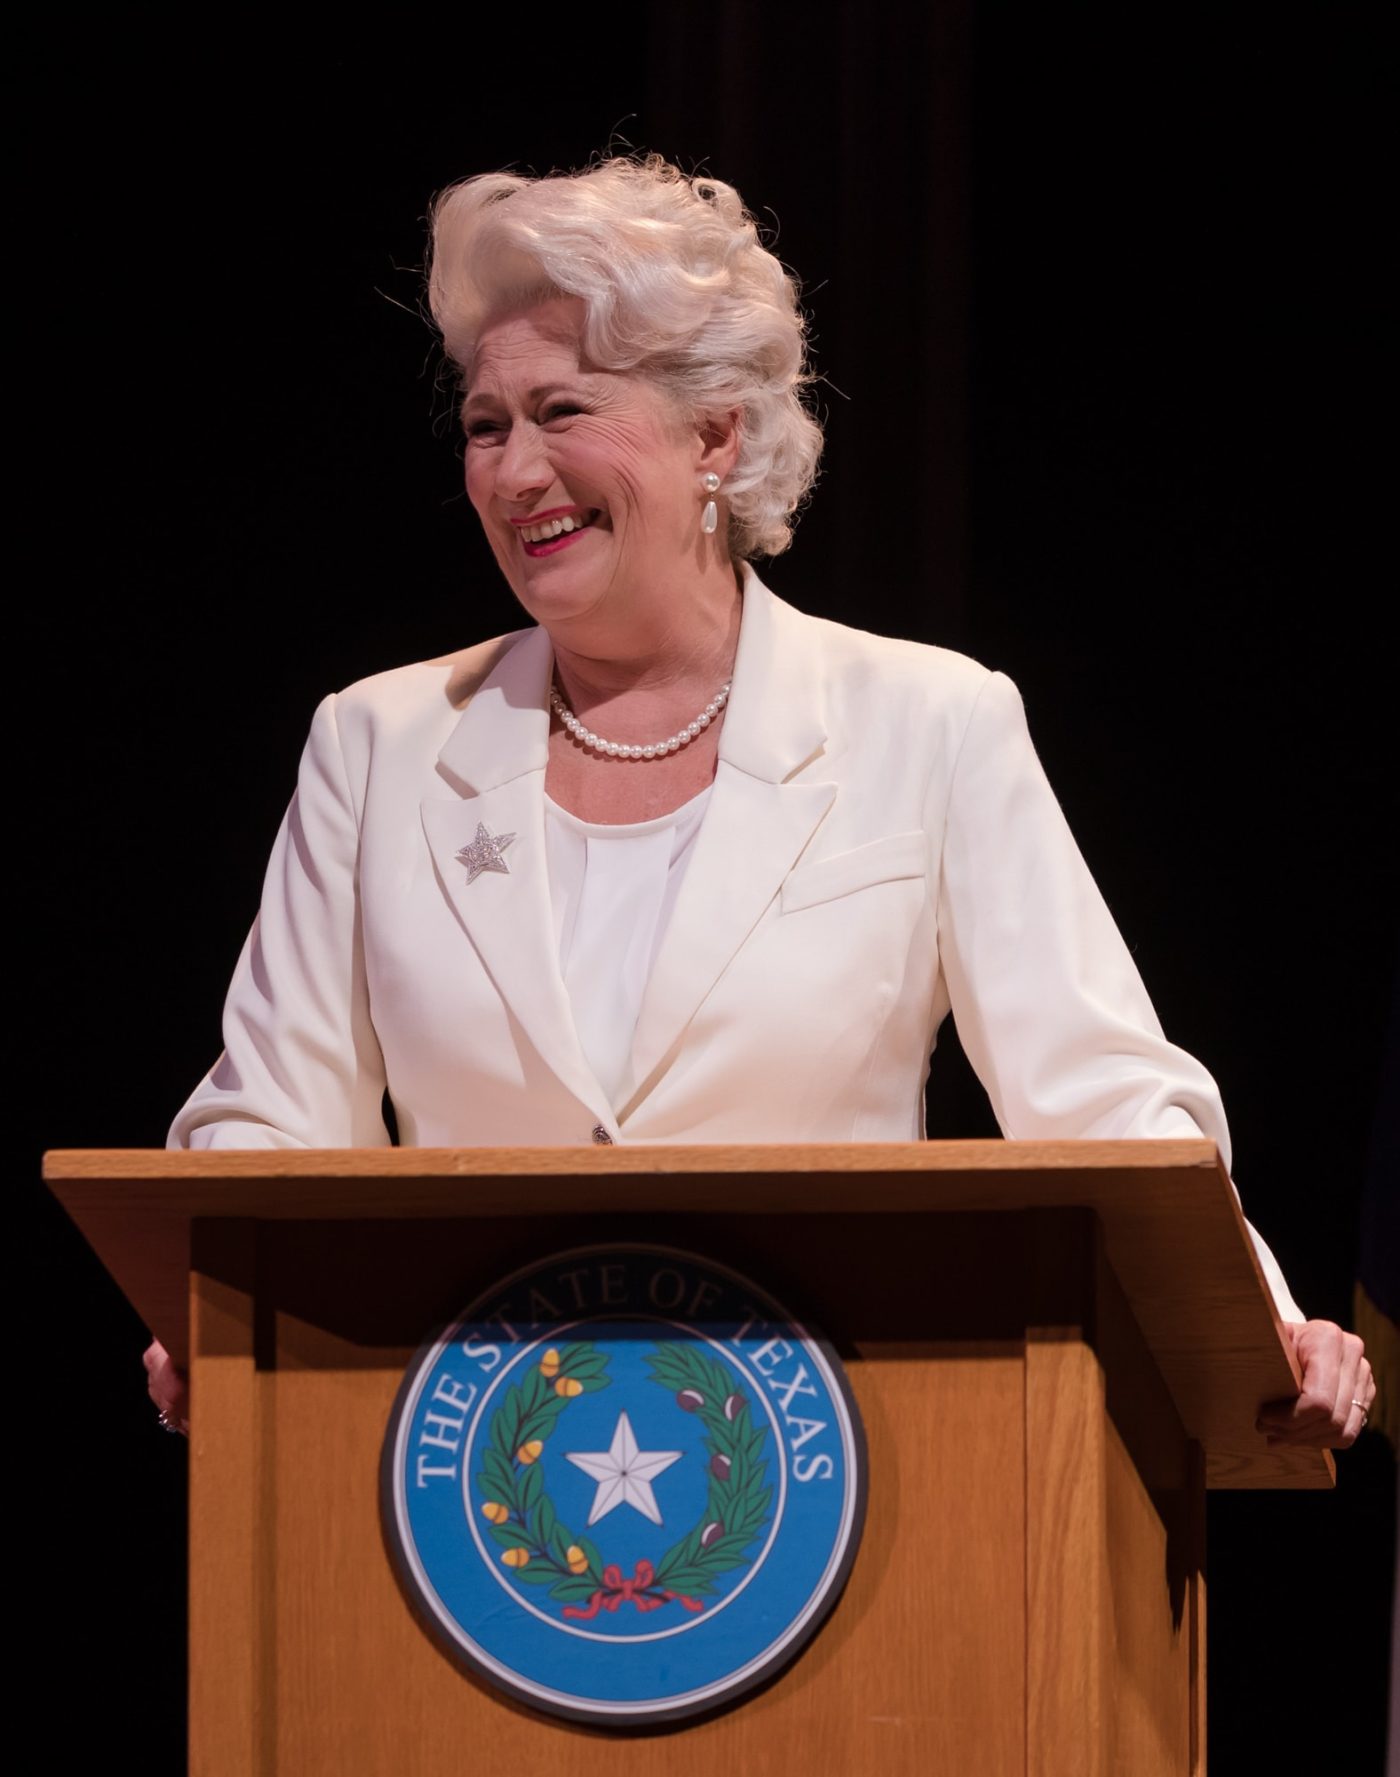 Power Plays: An Interview with Jayne Atkinson